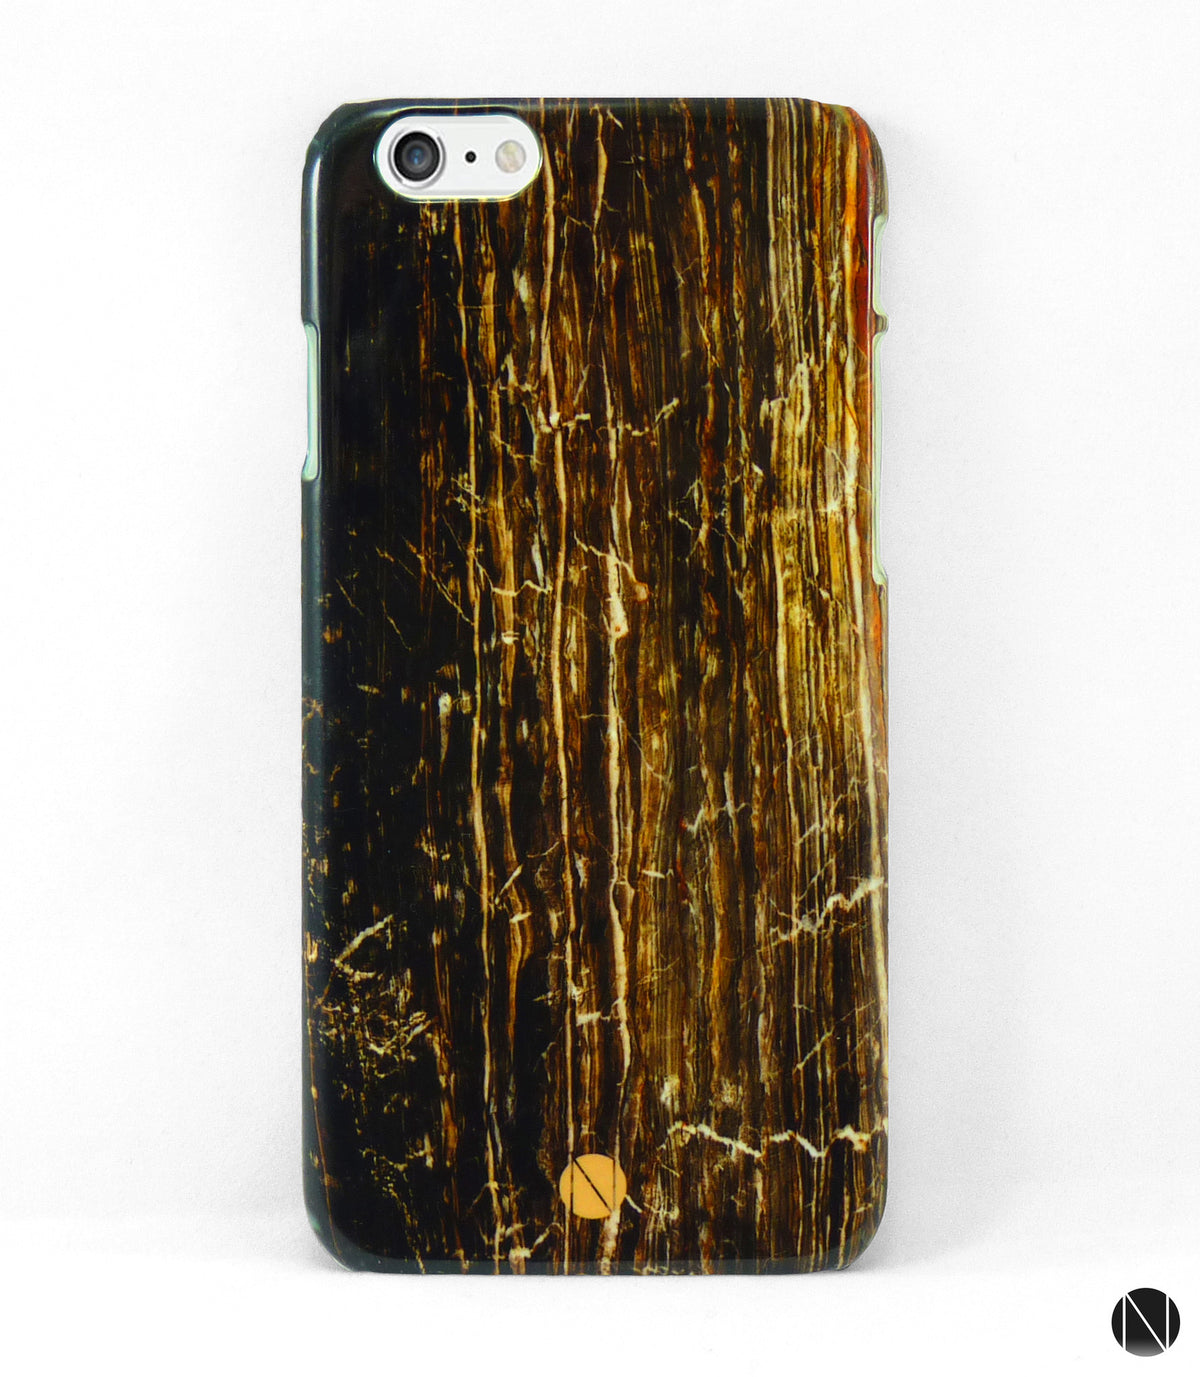 The Sparkled Marble Case